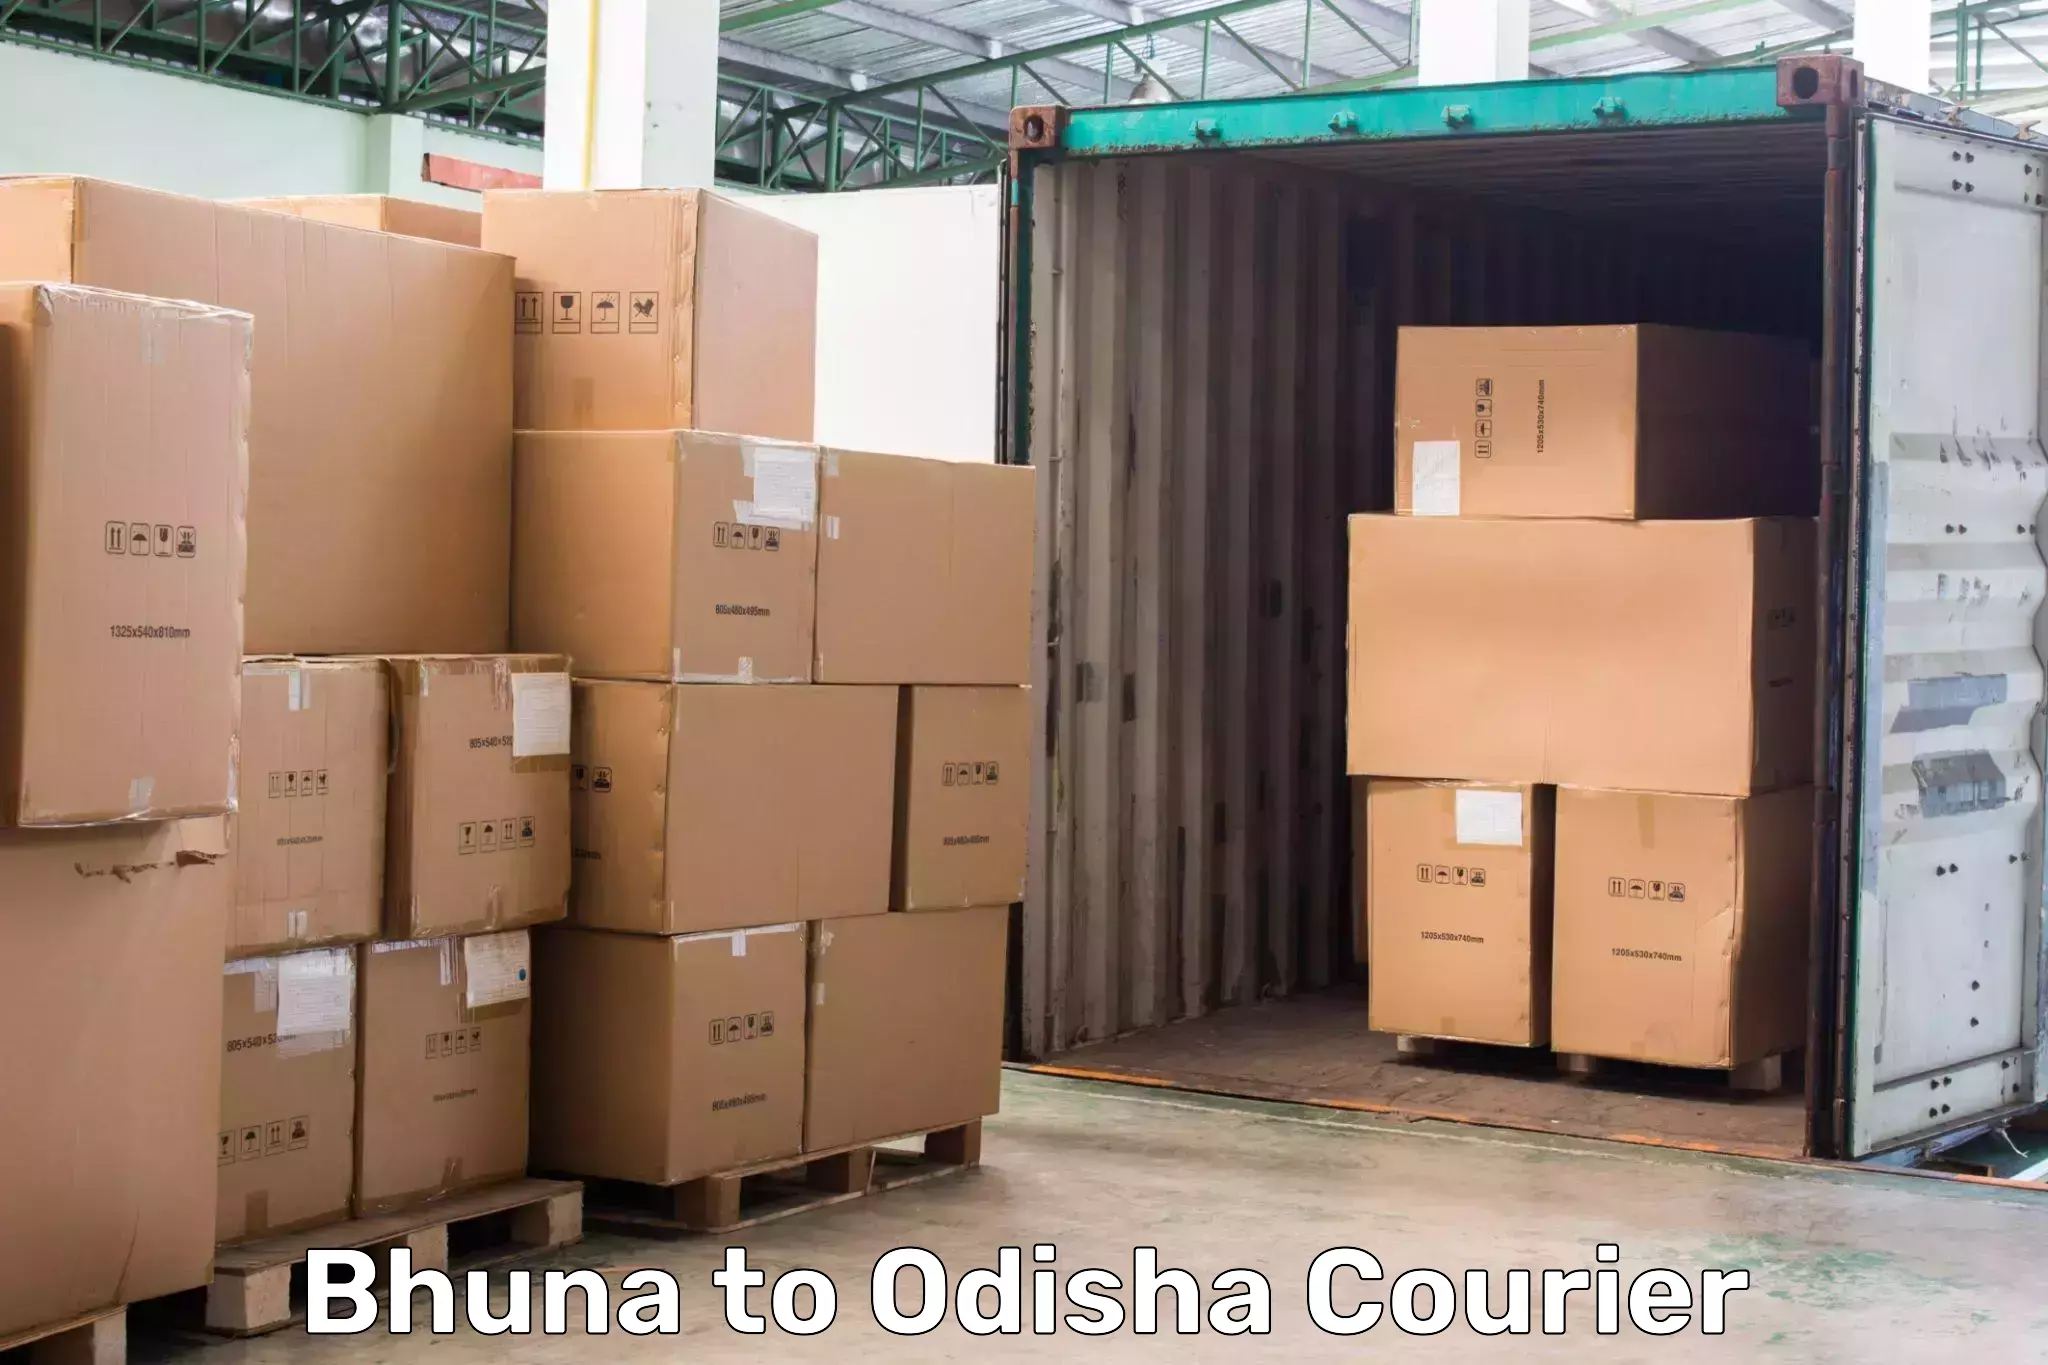 International courier networks Bhuna to Paradip Port